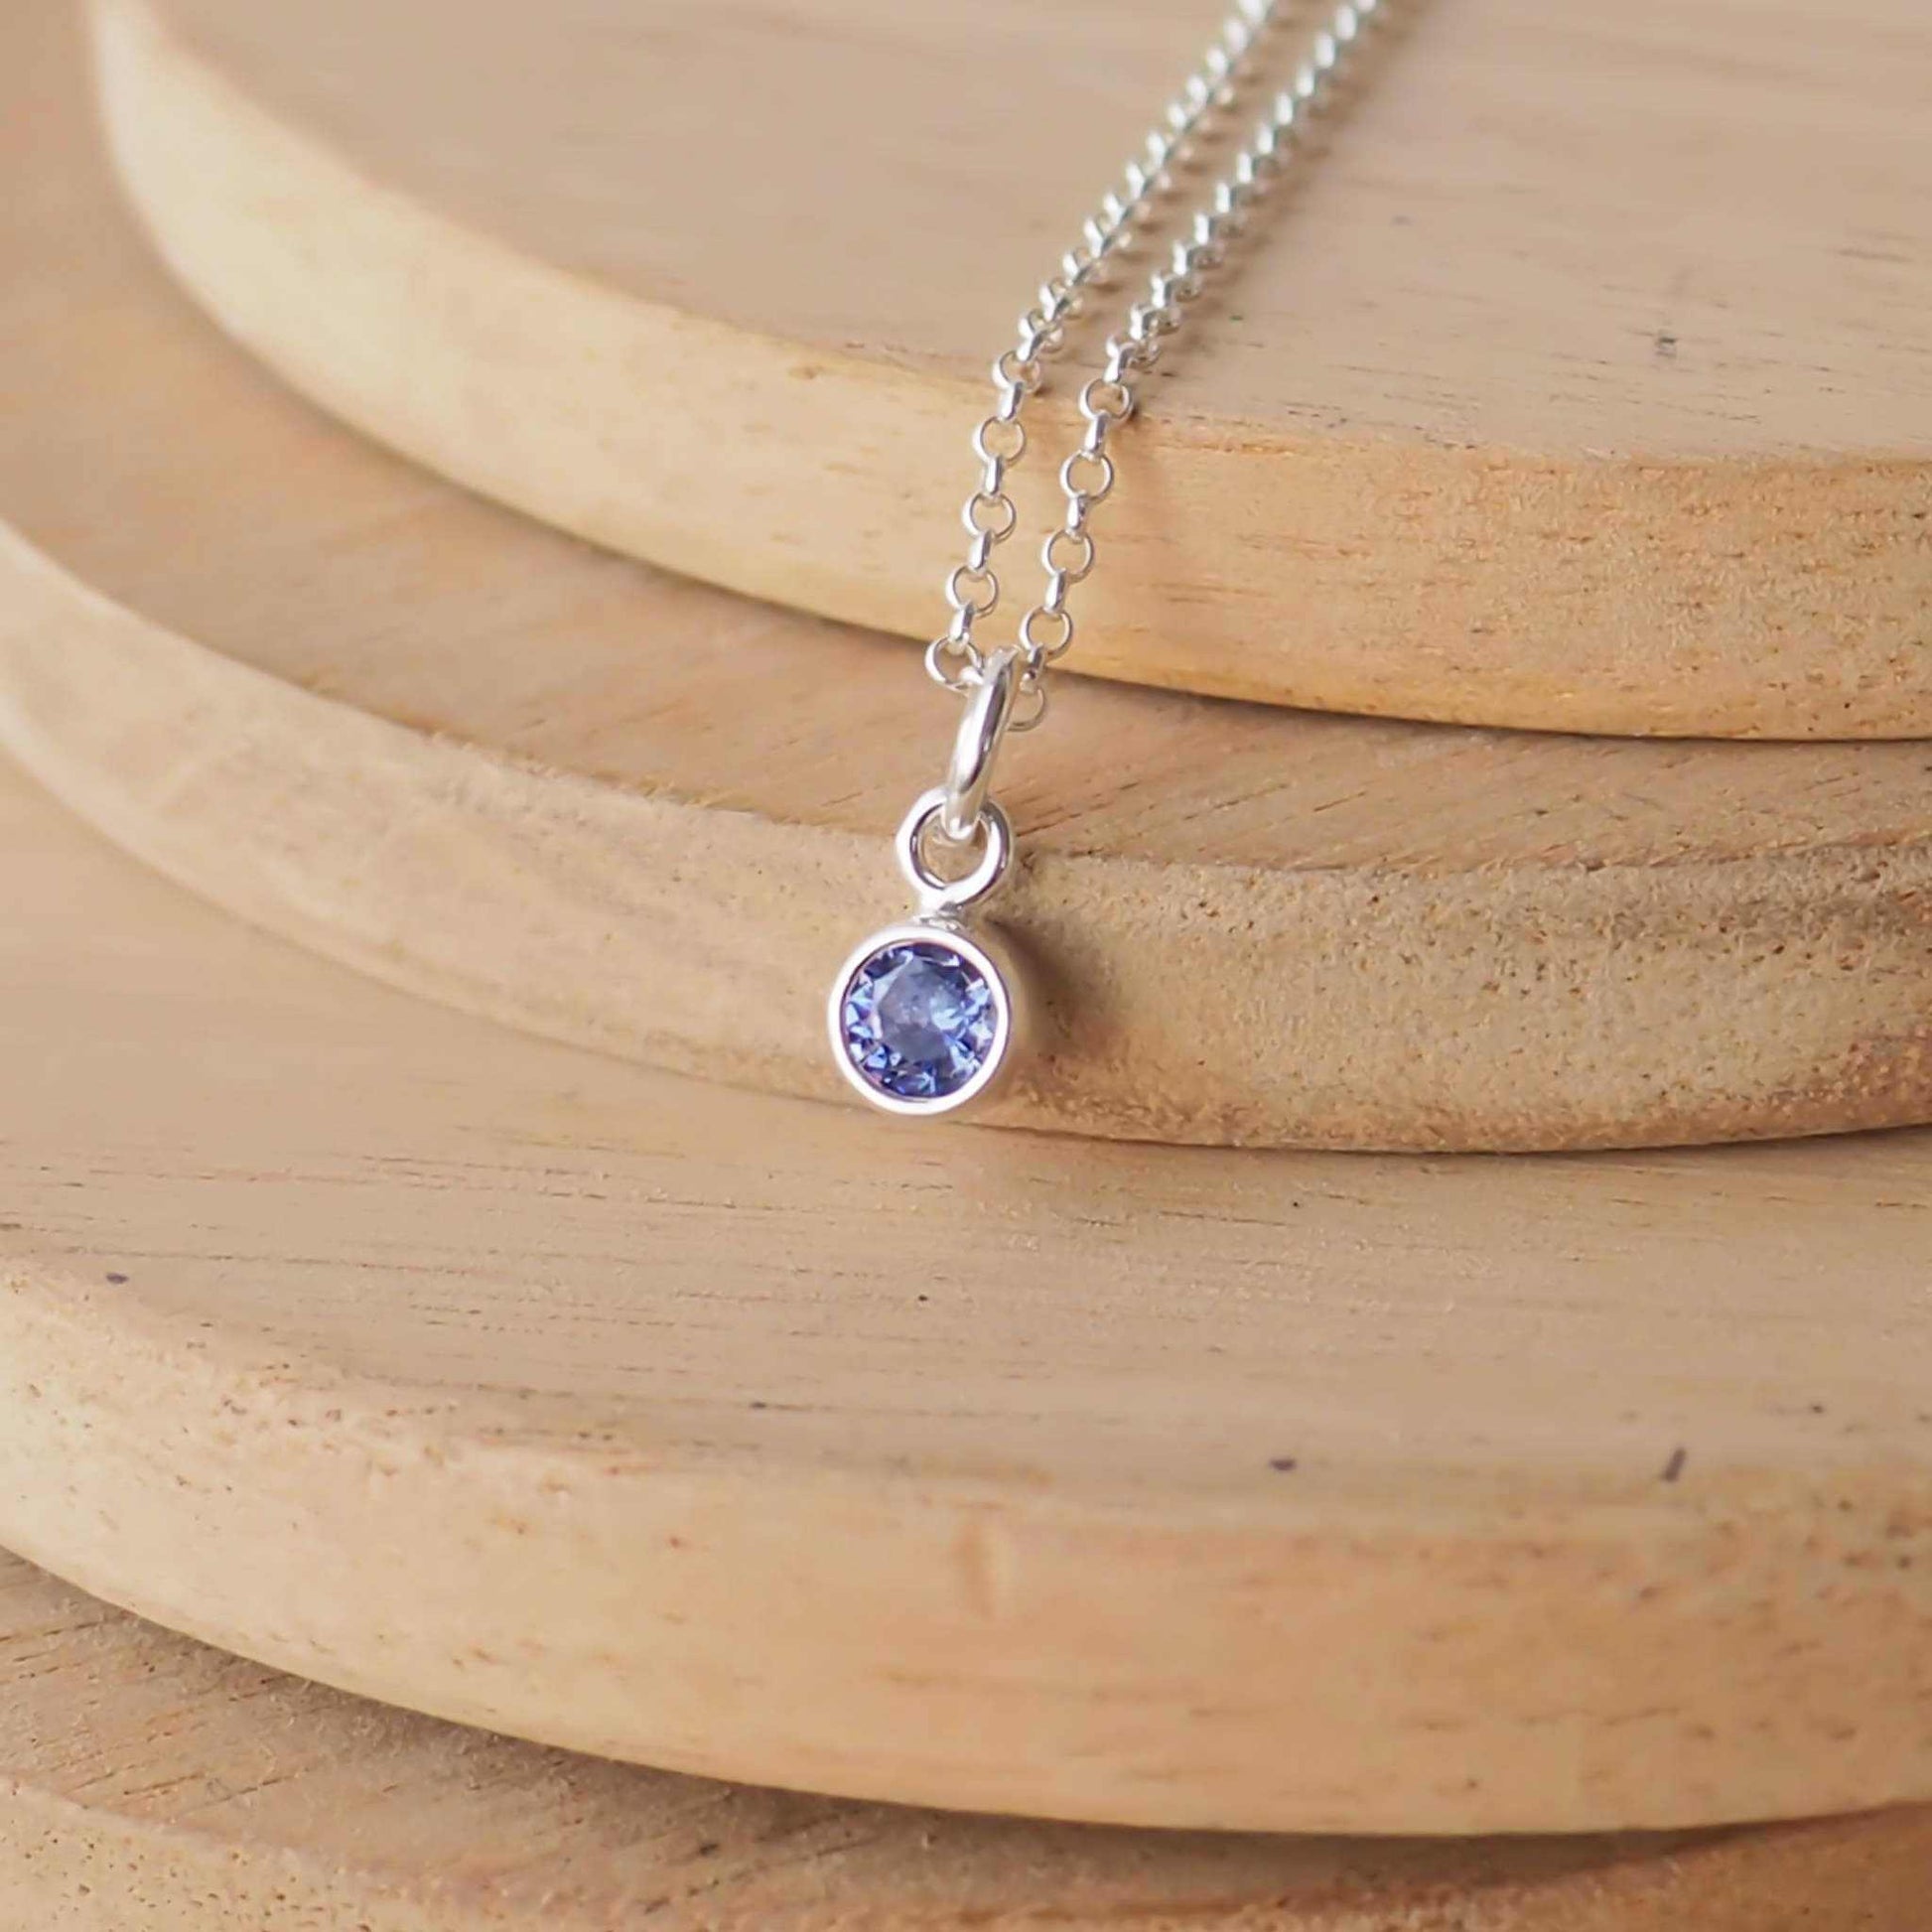 Small Sterling Silver and Cubic Zirconia Sapphire Blue necklace. A small 4mm faceted round blue gemstone with a simple silver setting on a trace style chain, suitable as a September Birthstone charm . Handmade in Scotland by Maram Jewellery